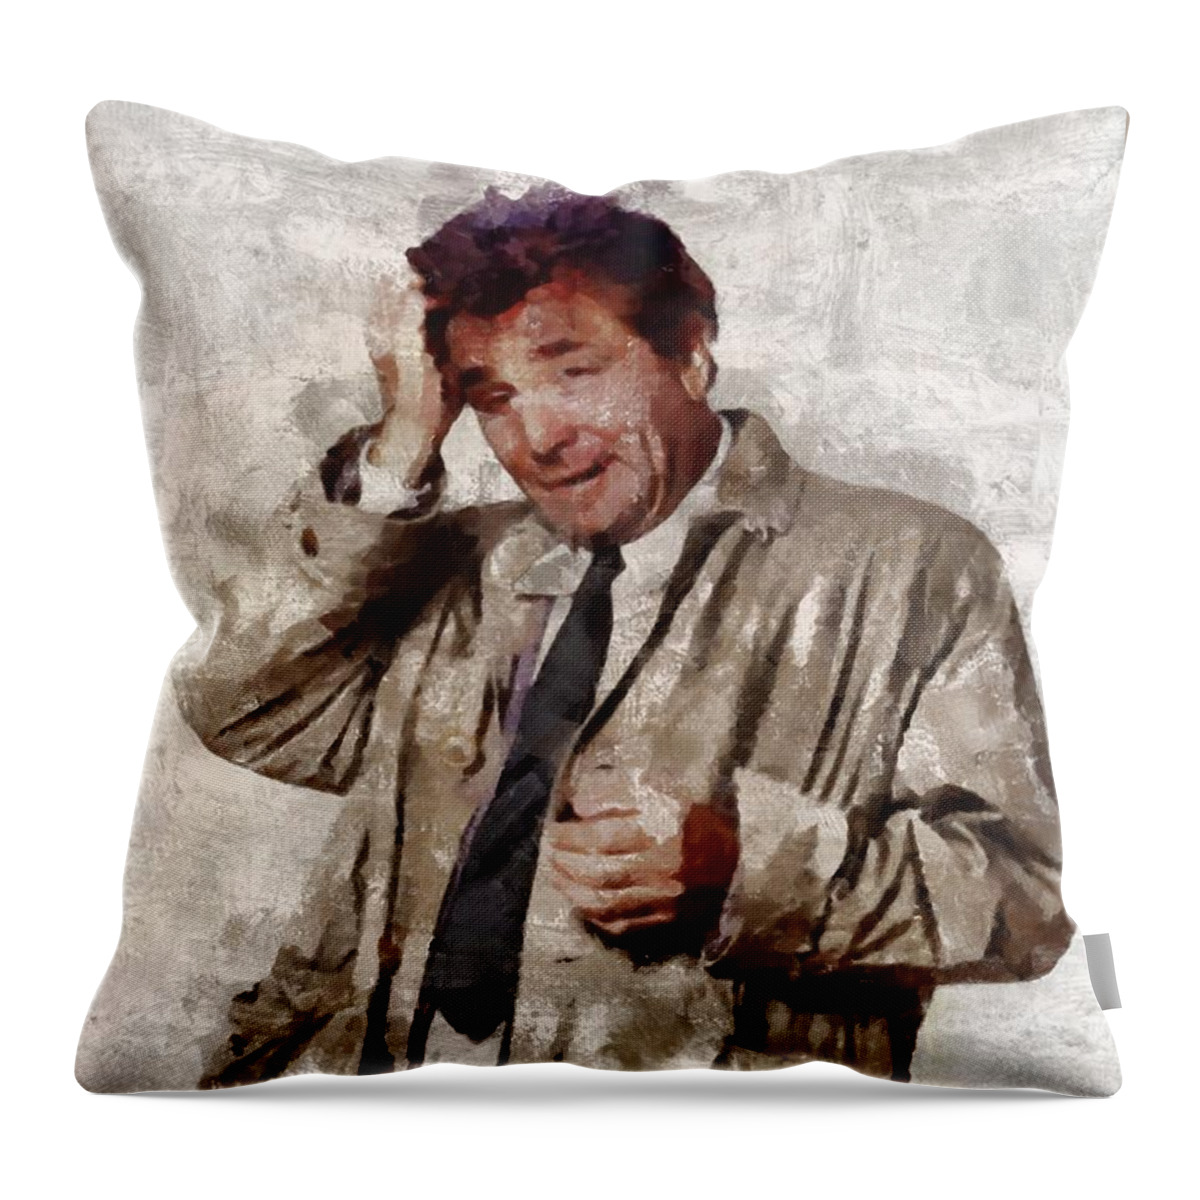 Peter Throw Pillow featuring the painting Peter Falk, Columbo by Esoterica Art Agency